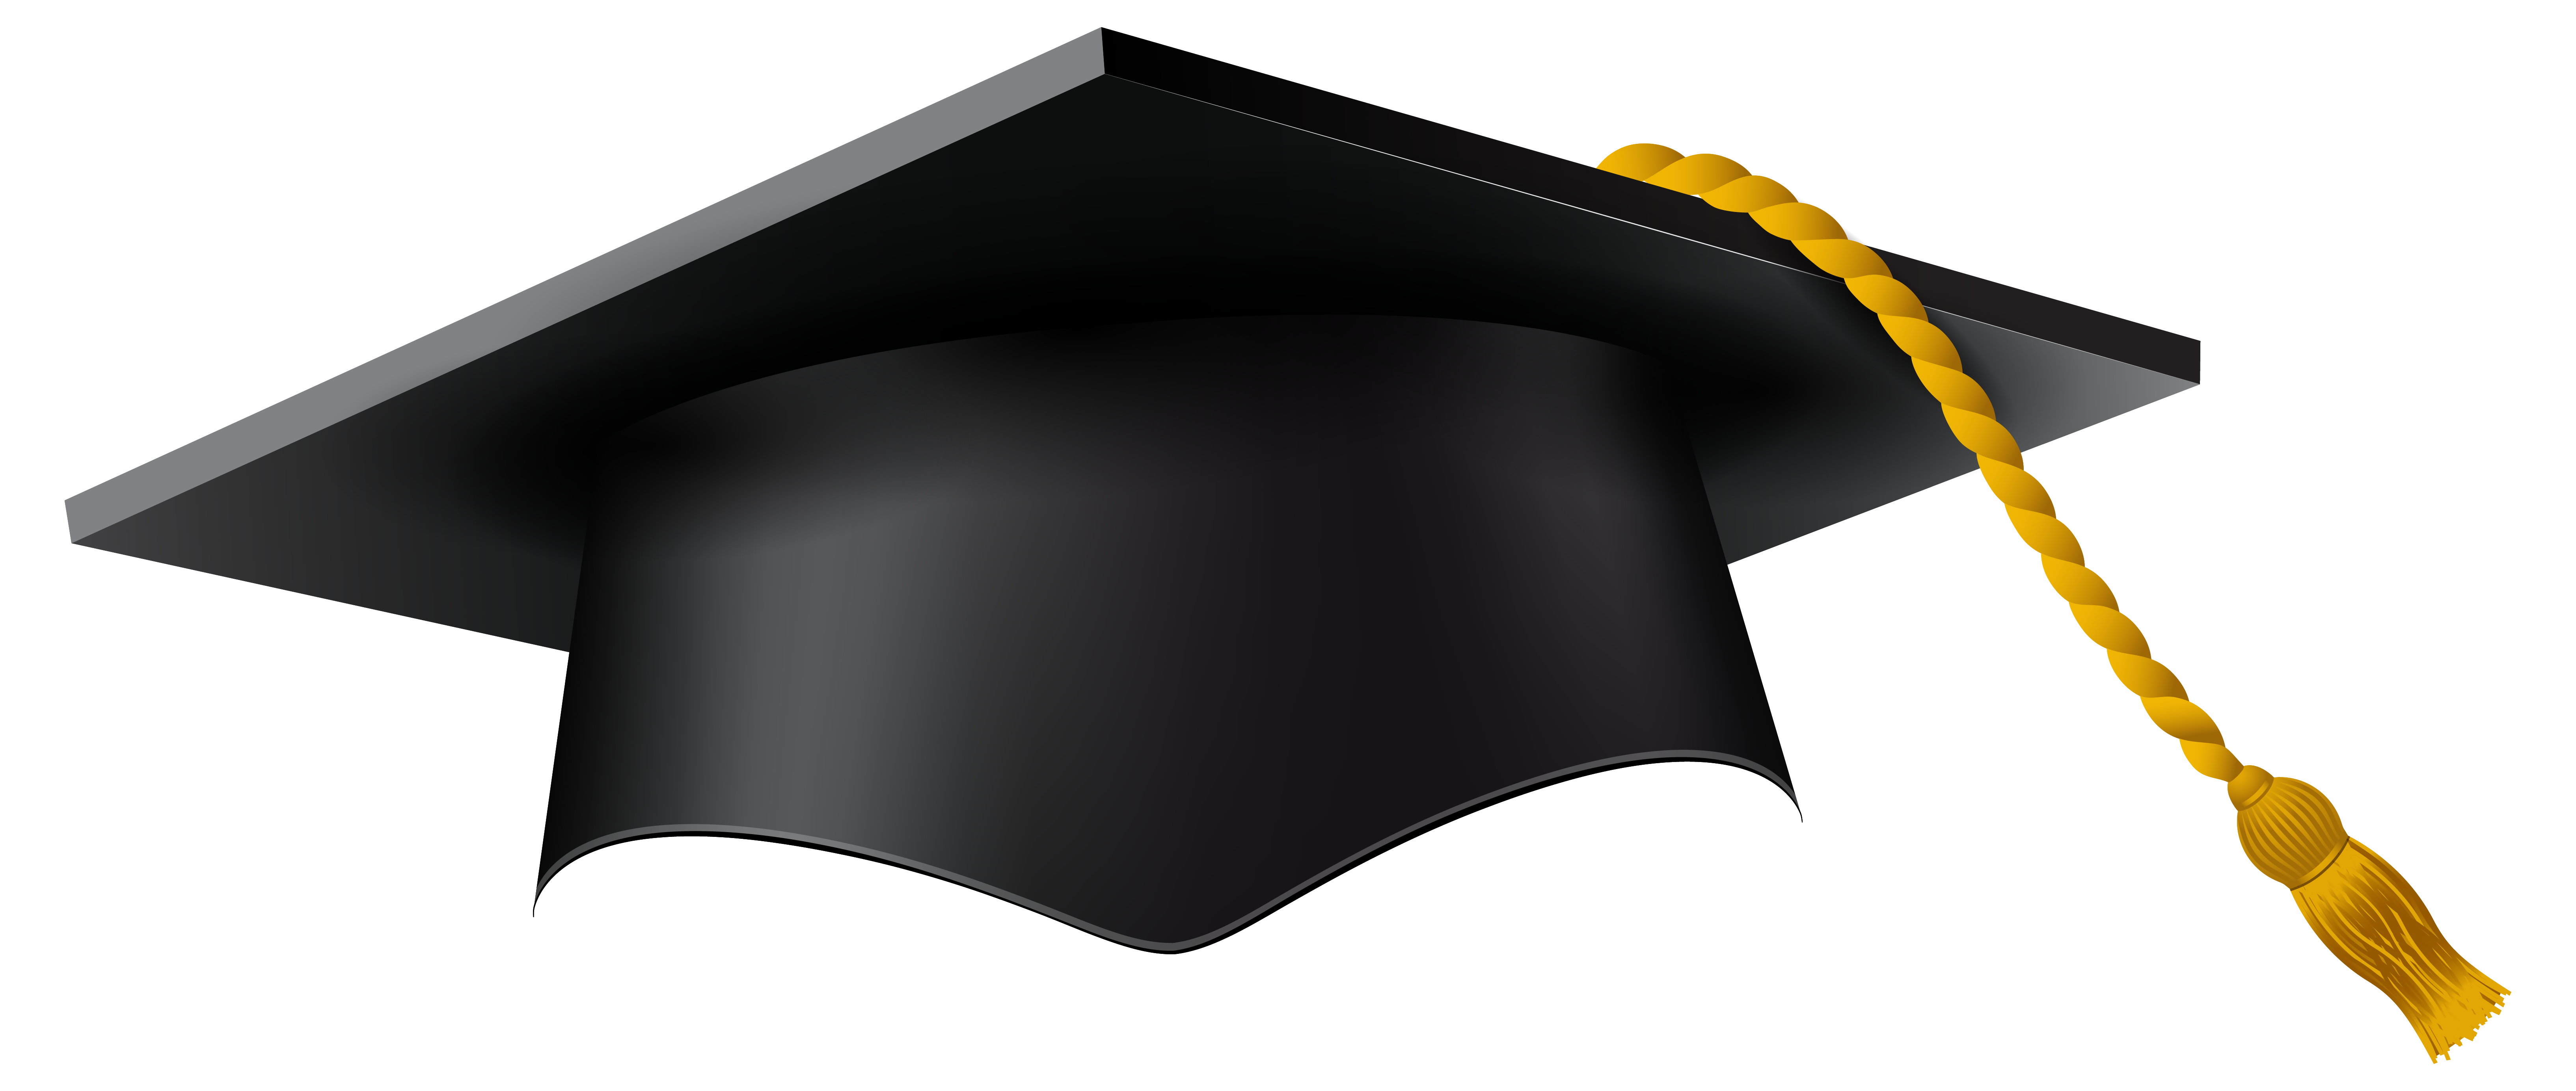 Creative clipart thinking cap. Graduation png image gallery